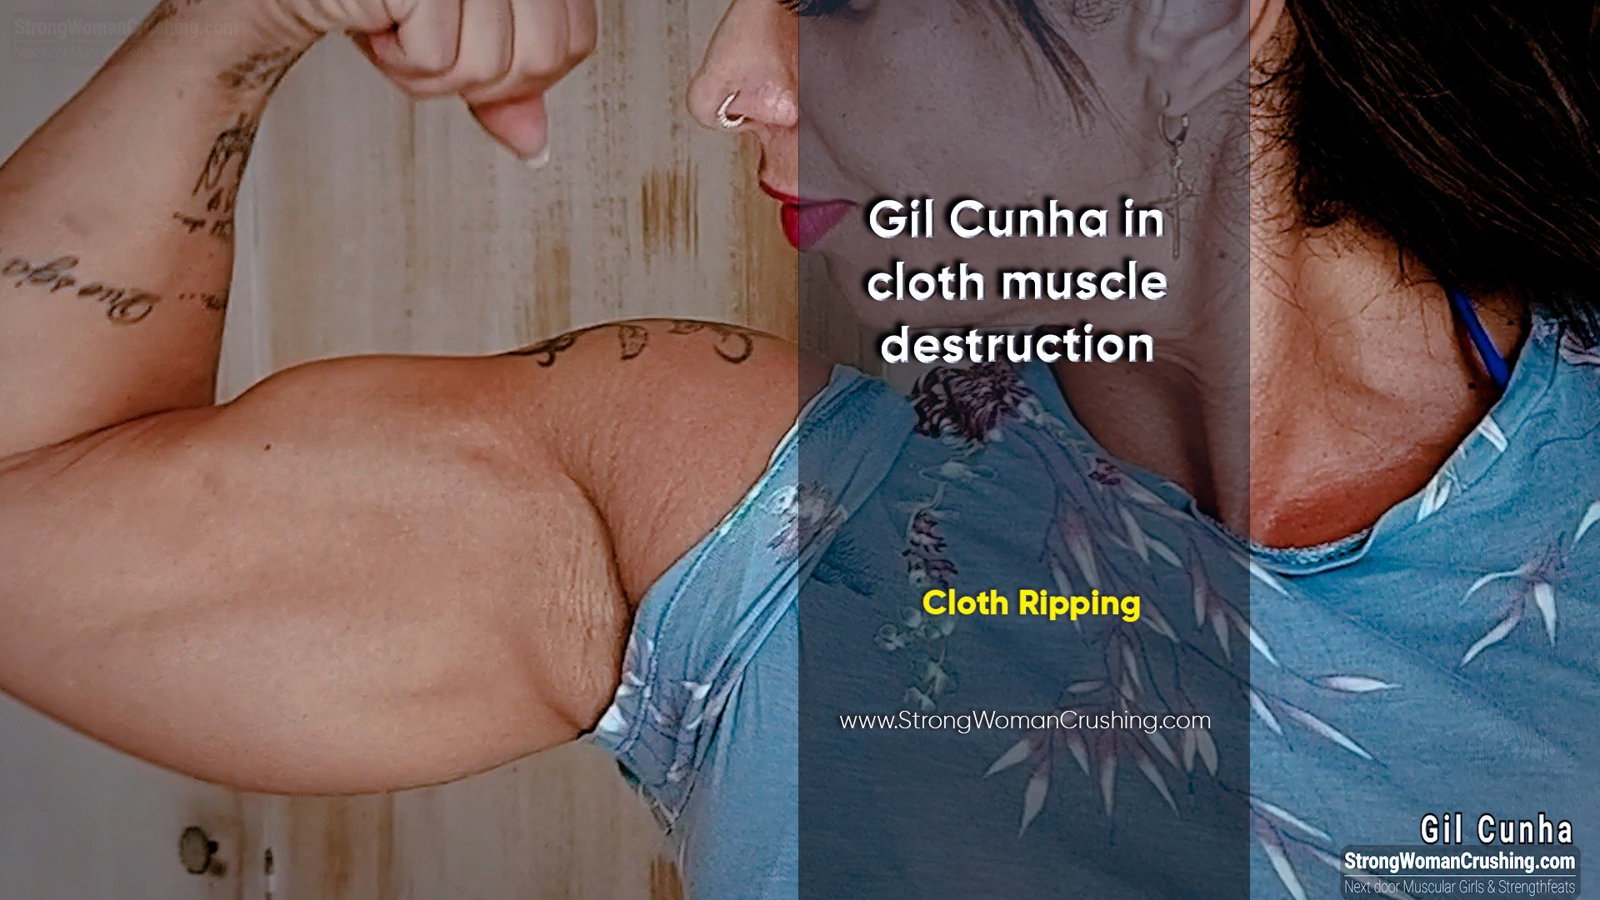 Photo by MusclegirlStrength with the username @MusclegirlStrength, who is a brand user,  May 2, 2024 at 2:20 PM and the text says 'Ultimate Muscle Destruction by Gil Cunha: Watch in Awe!: https://www.strongwomancrushing.com/

#musclegirl #musclegirllove #femalemuscle #femalemuscles #featsofstrength #MuscleBombshells #RippedGoddesses #PowerfulDisplay'